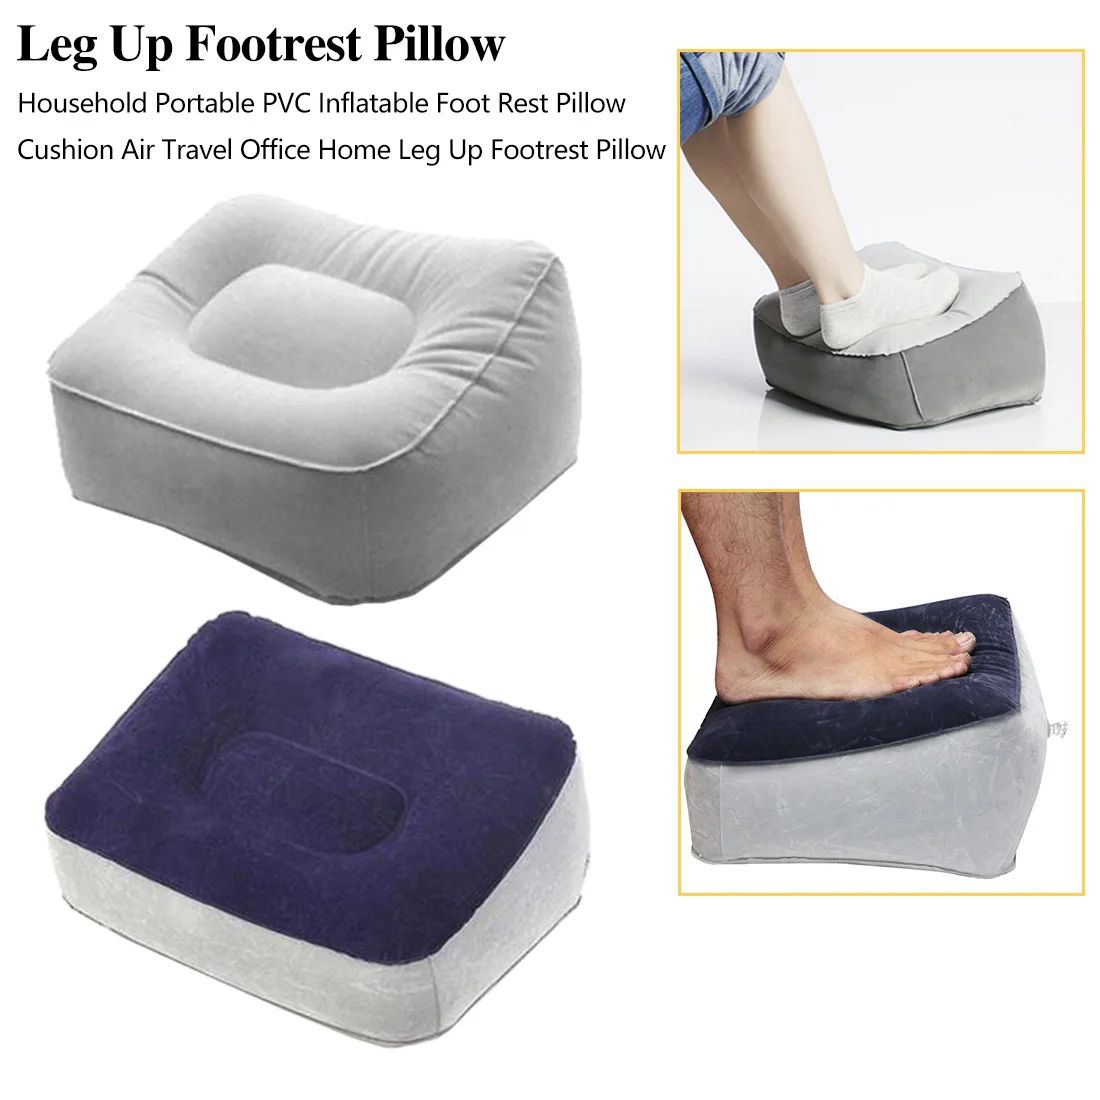 Portable Inflatable Foot Rest Pillow Cushion PVC Air Travel Office Home Leg Up Footrest Relaxing Feet Tool | Дом и сад